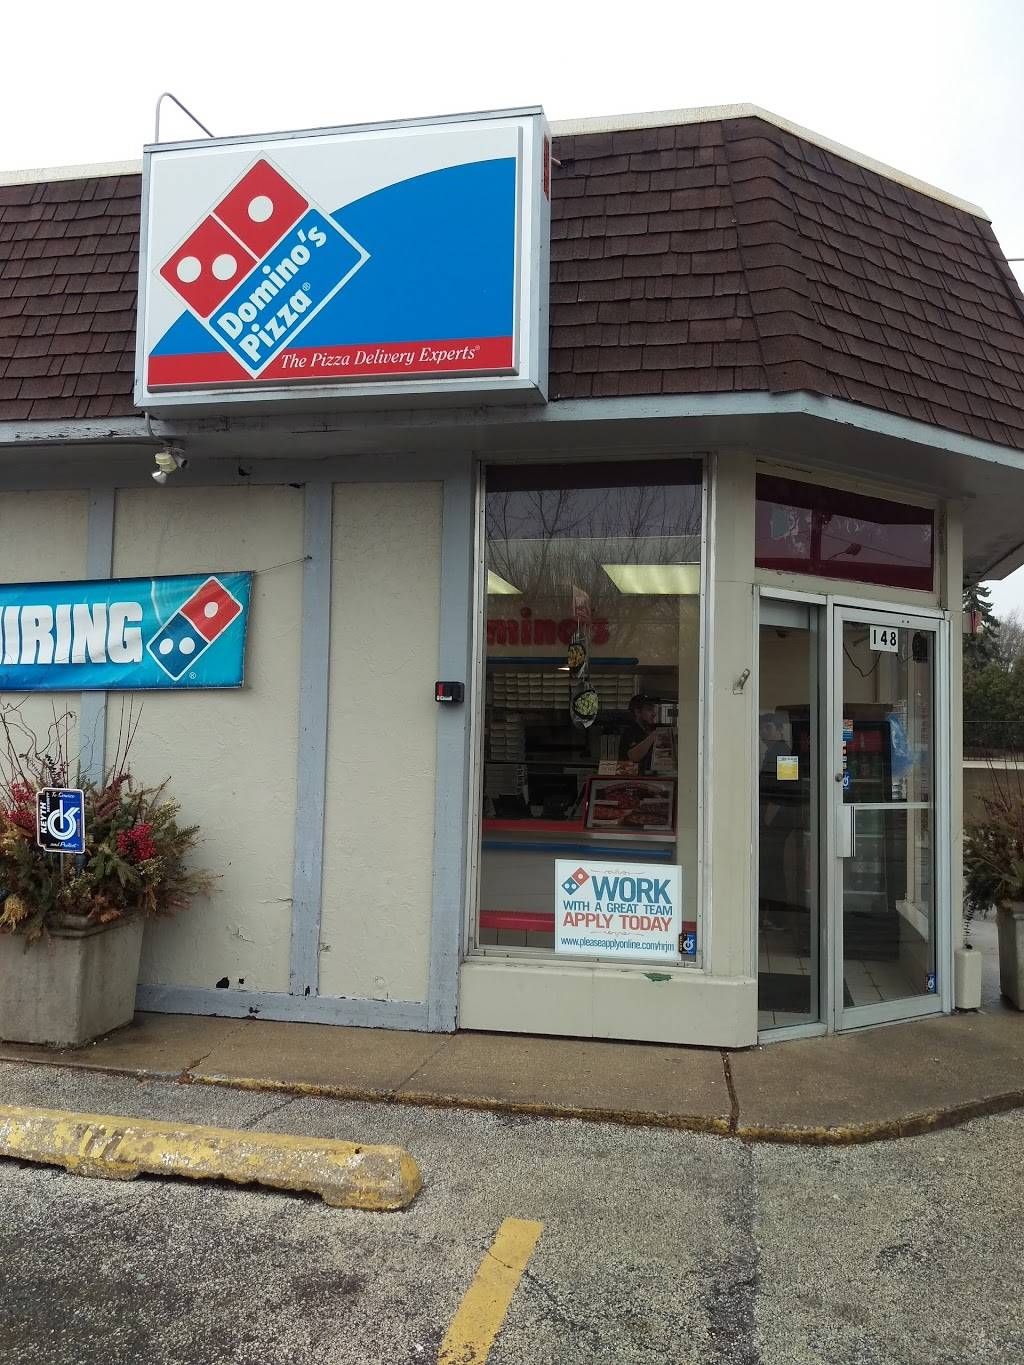 Dominos Pizza | meal delivery | 9 Prairie Ave Ste B, Highwood, IL 60040, USA | 8474336441 OR +1 847-433-6441